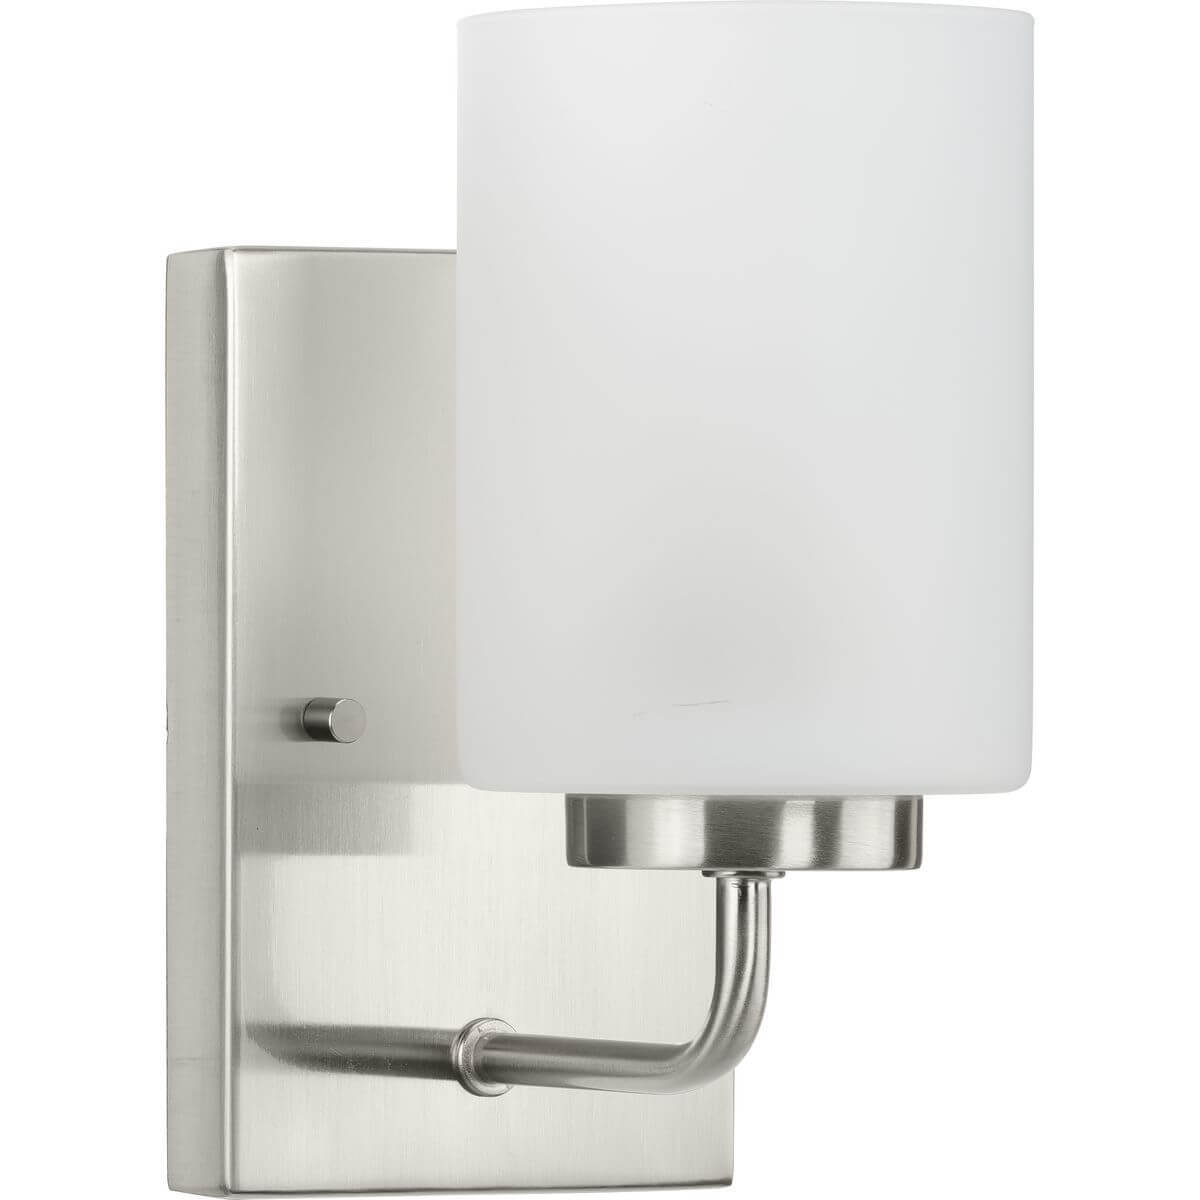 Progress Lighting Merry 1 Light 6 inch Bath Vanity Light in Brushed Nickel with Etched Glass P300327-009